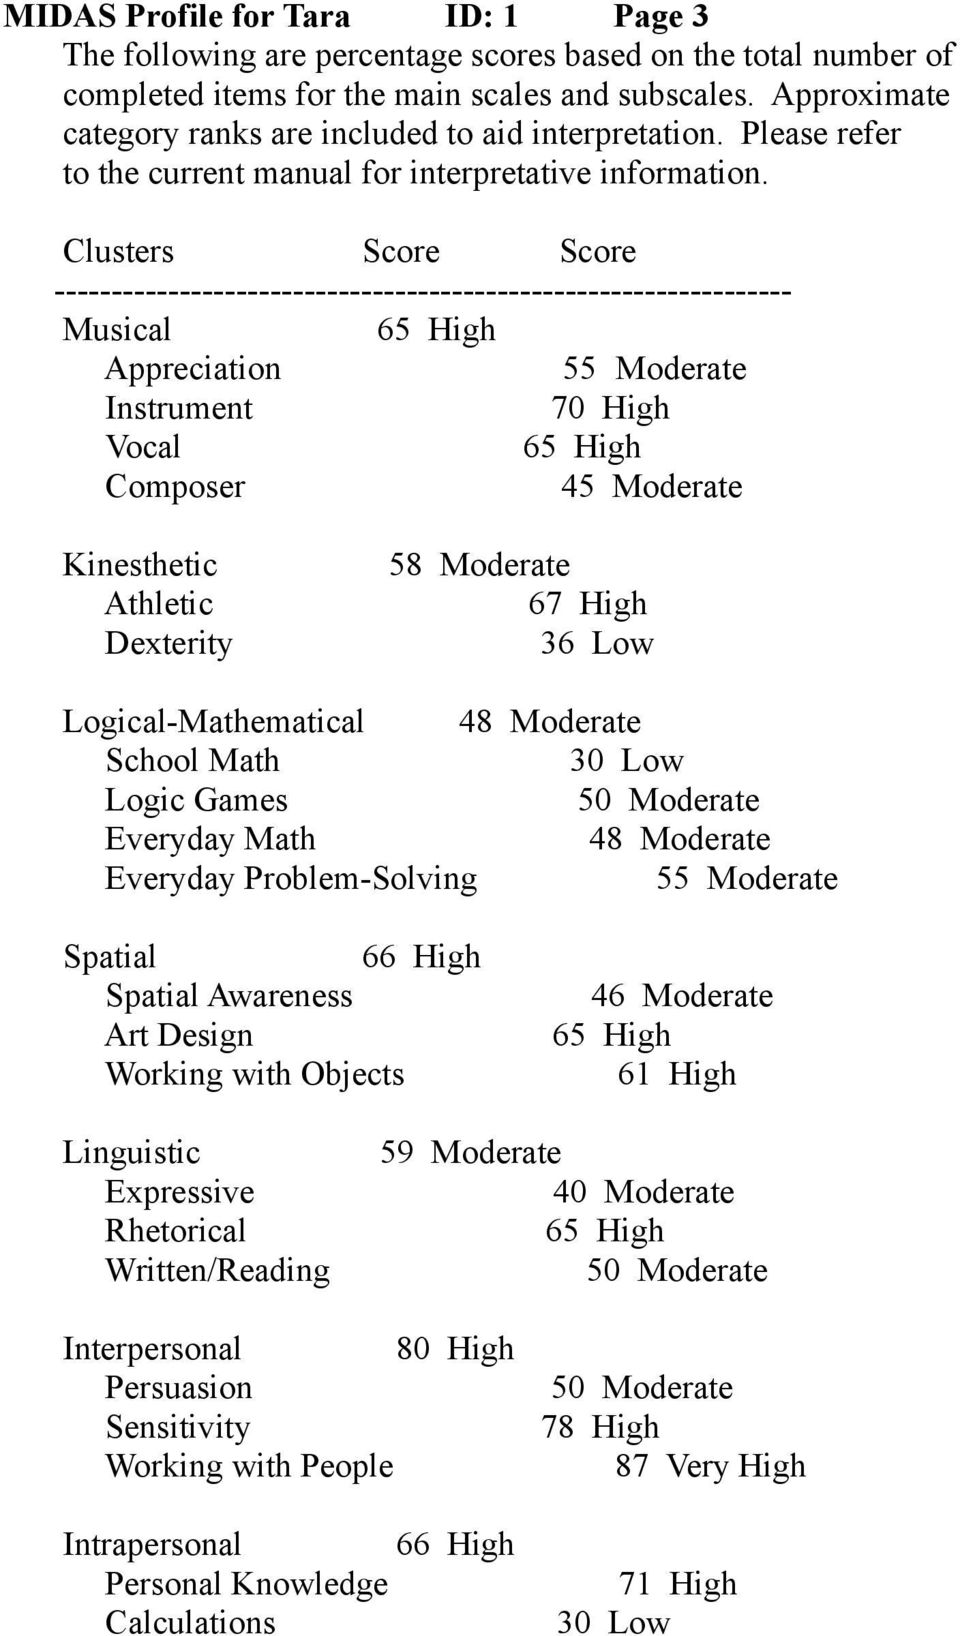 Clusters Score Score - Appreciation 55 Moderate Instrument 70 High Vocal Composer 45 Moderate Athletic Dexterity 58 Moderate 67 High 36 Low 48 Moderate School Math 30 Low Logic Games Everyday Math